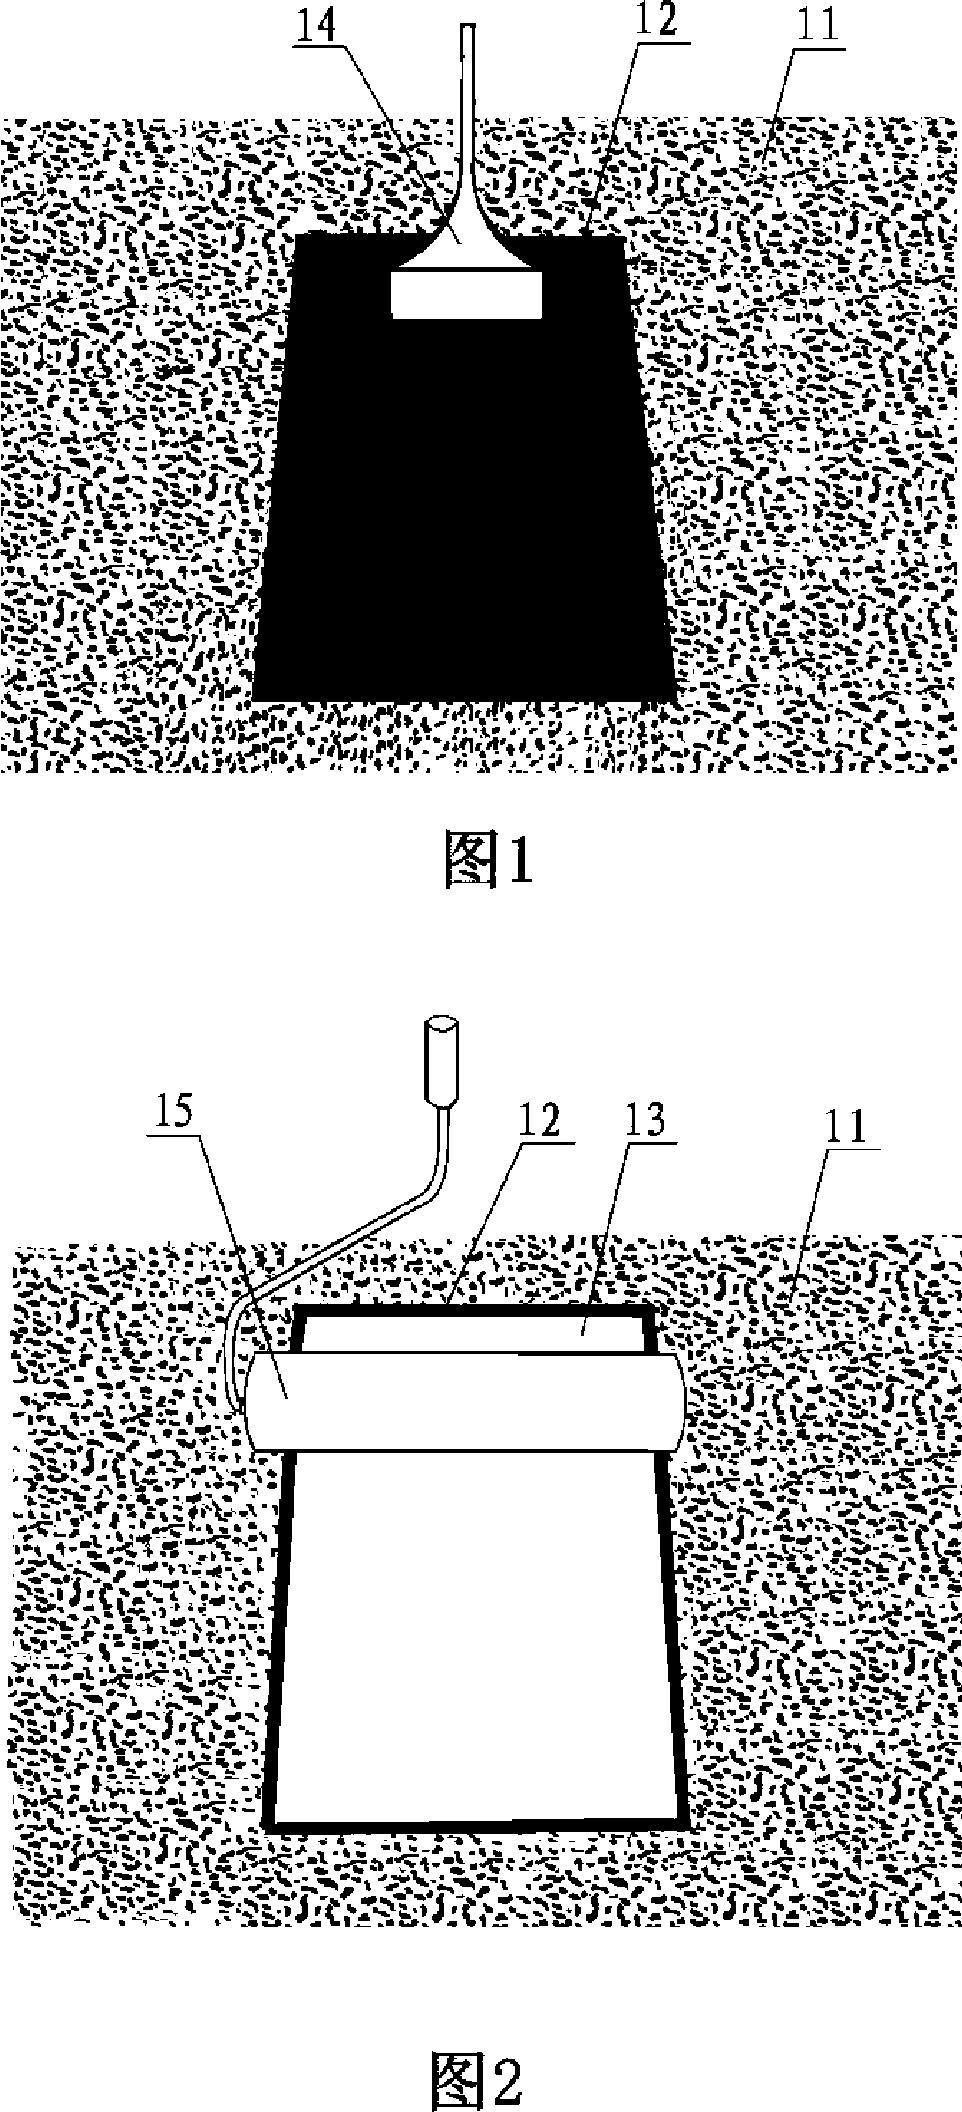 Method for detecting surface porosity on road surface of pervious concrete, and porosity on section of test block